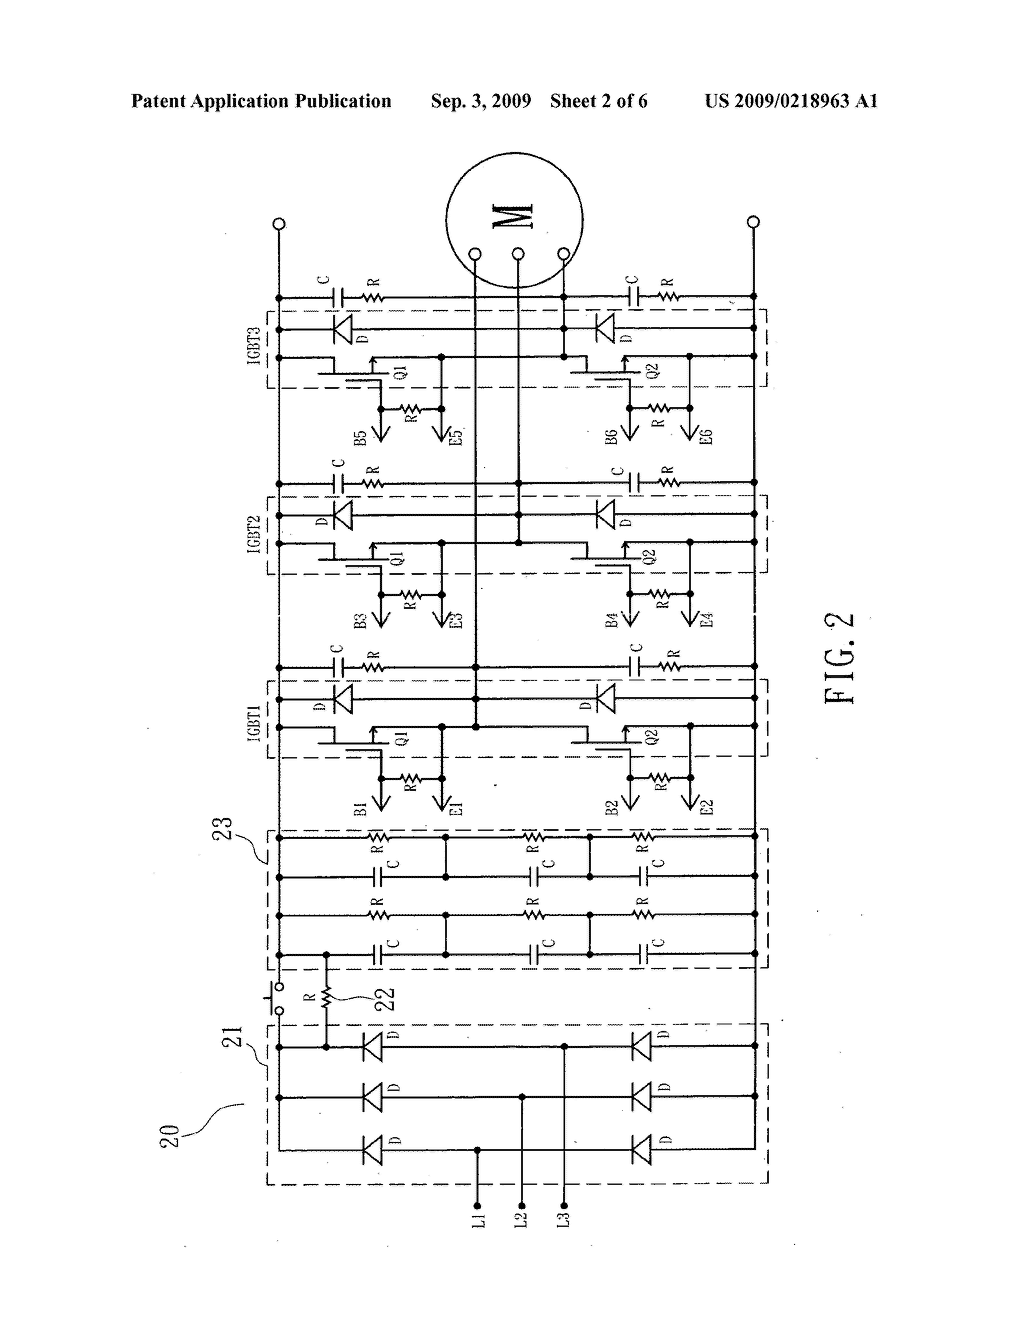 Linear motor automatic control circuit assembly for controlling the operation of a 3-phase linear motor-driven submersible oil pump of an artificial oil lift system - diagram, schematic, and image 03